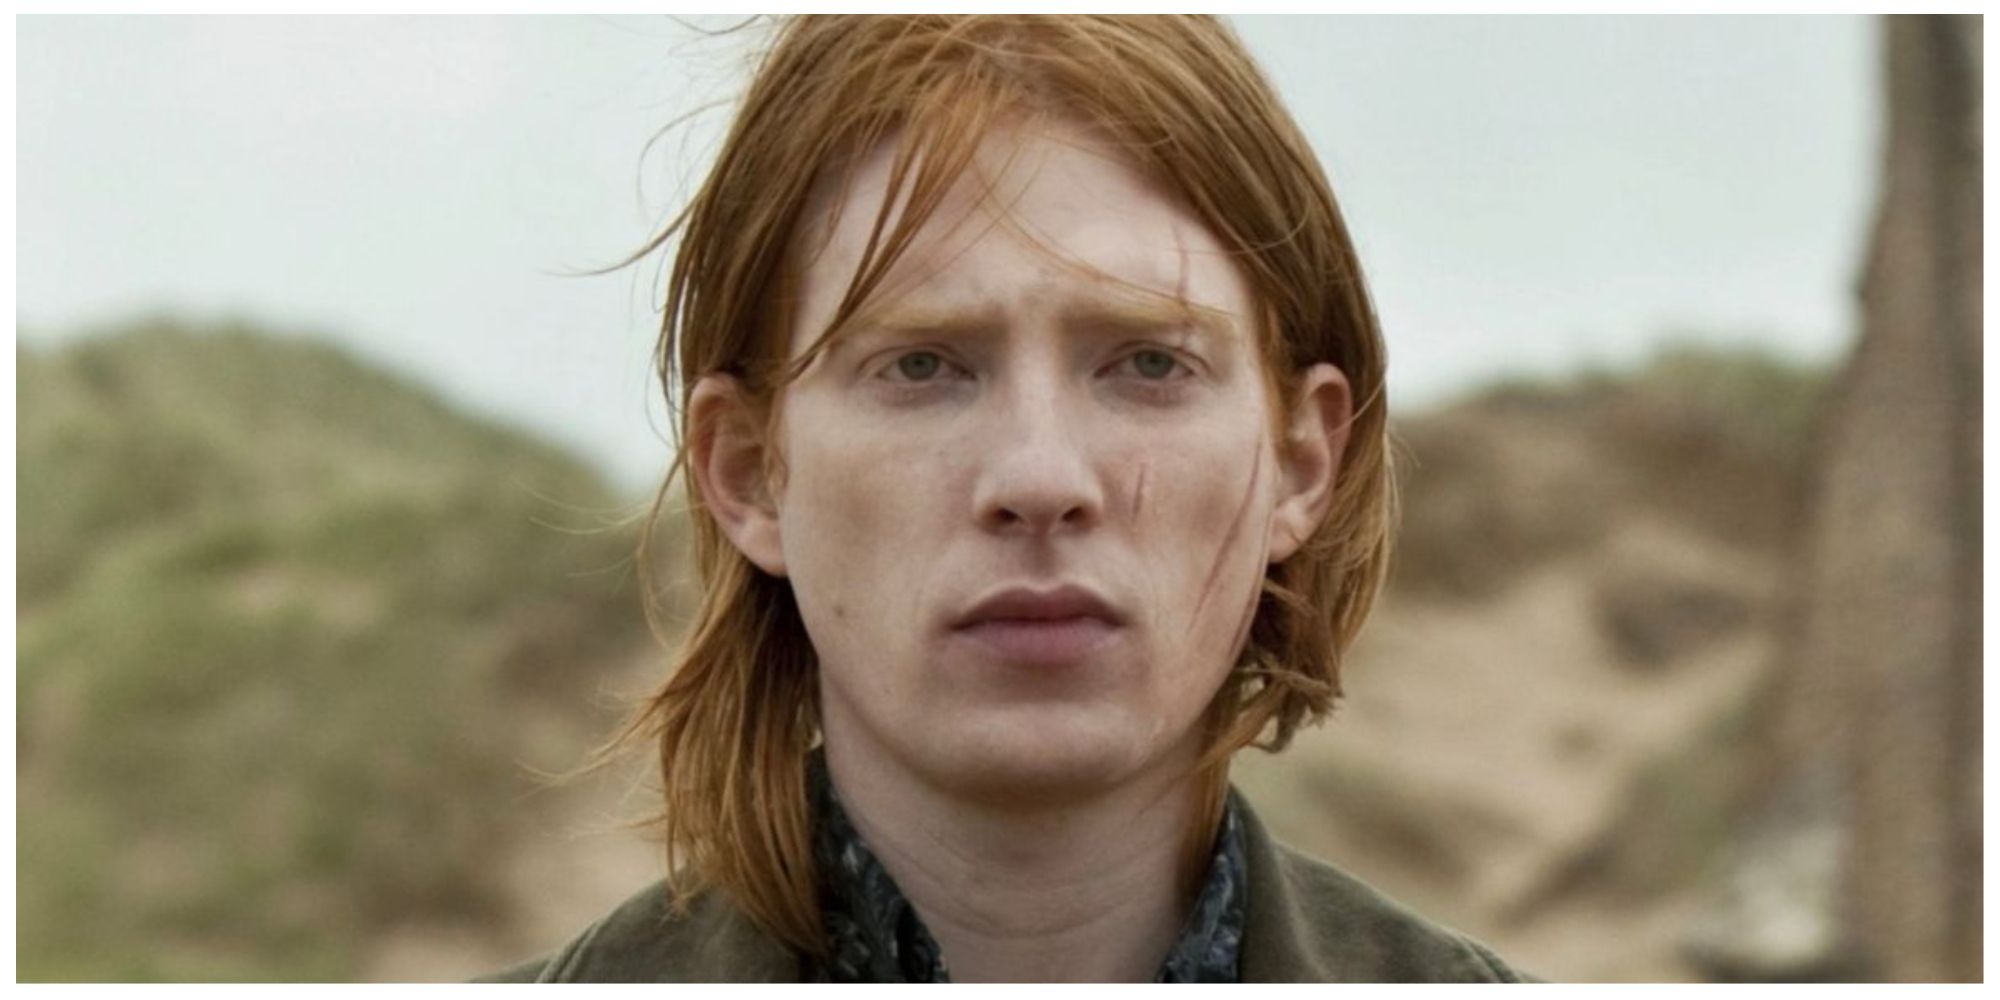 Bill Weasley in the Harry Potter Deathly Hallows movies